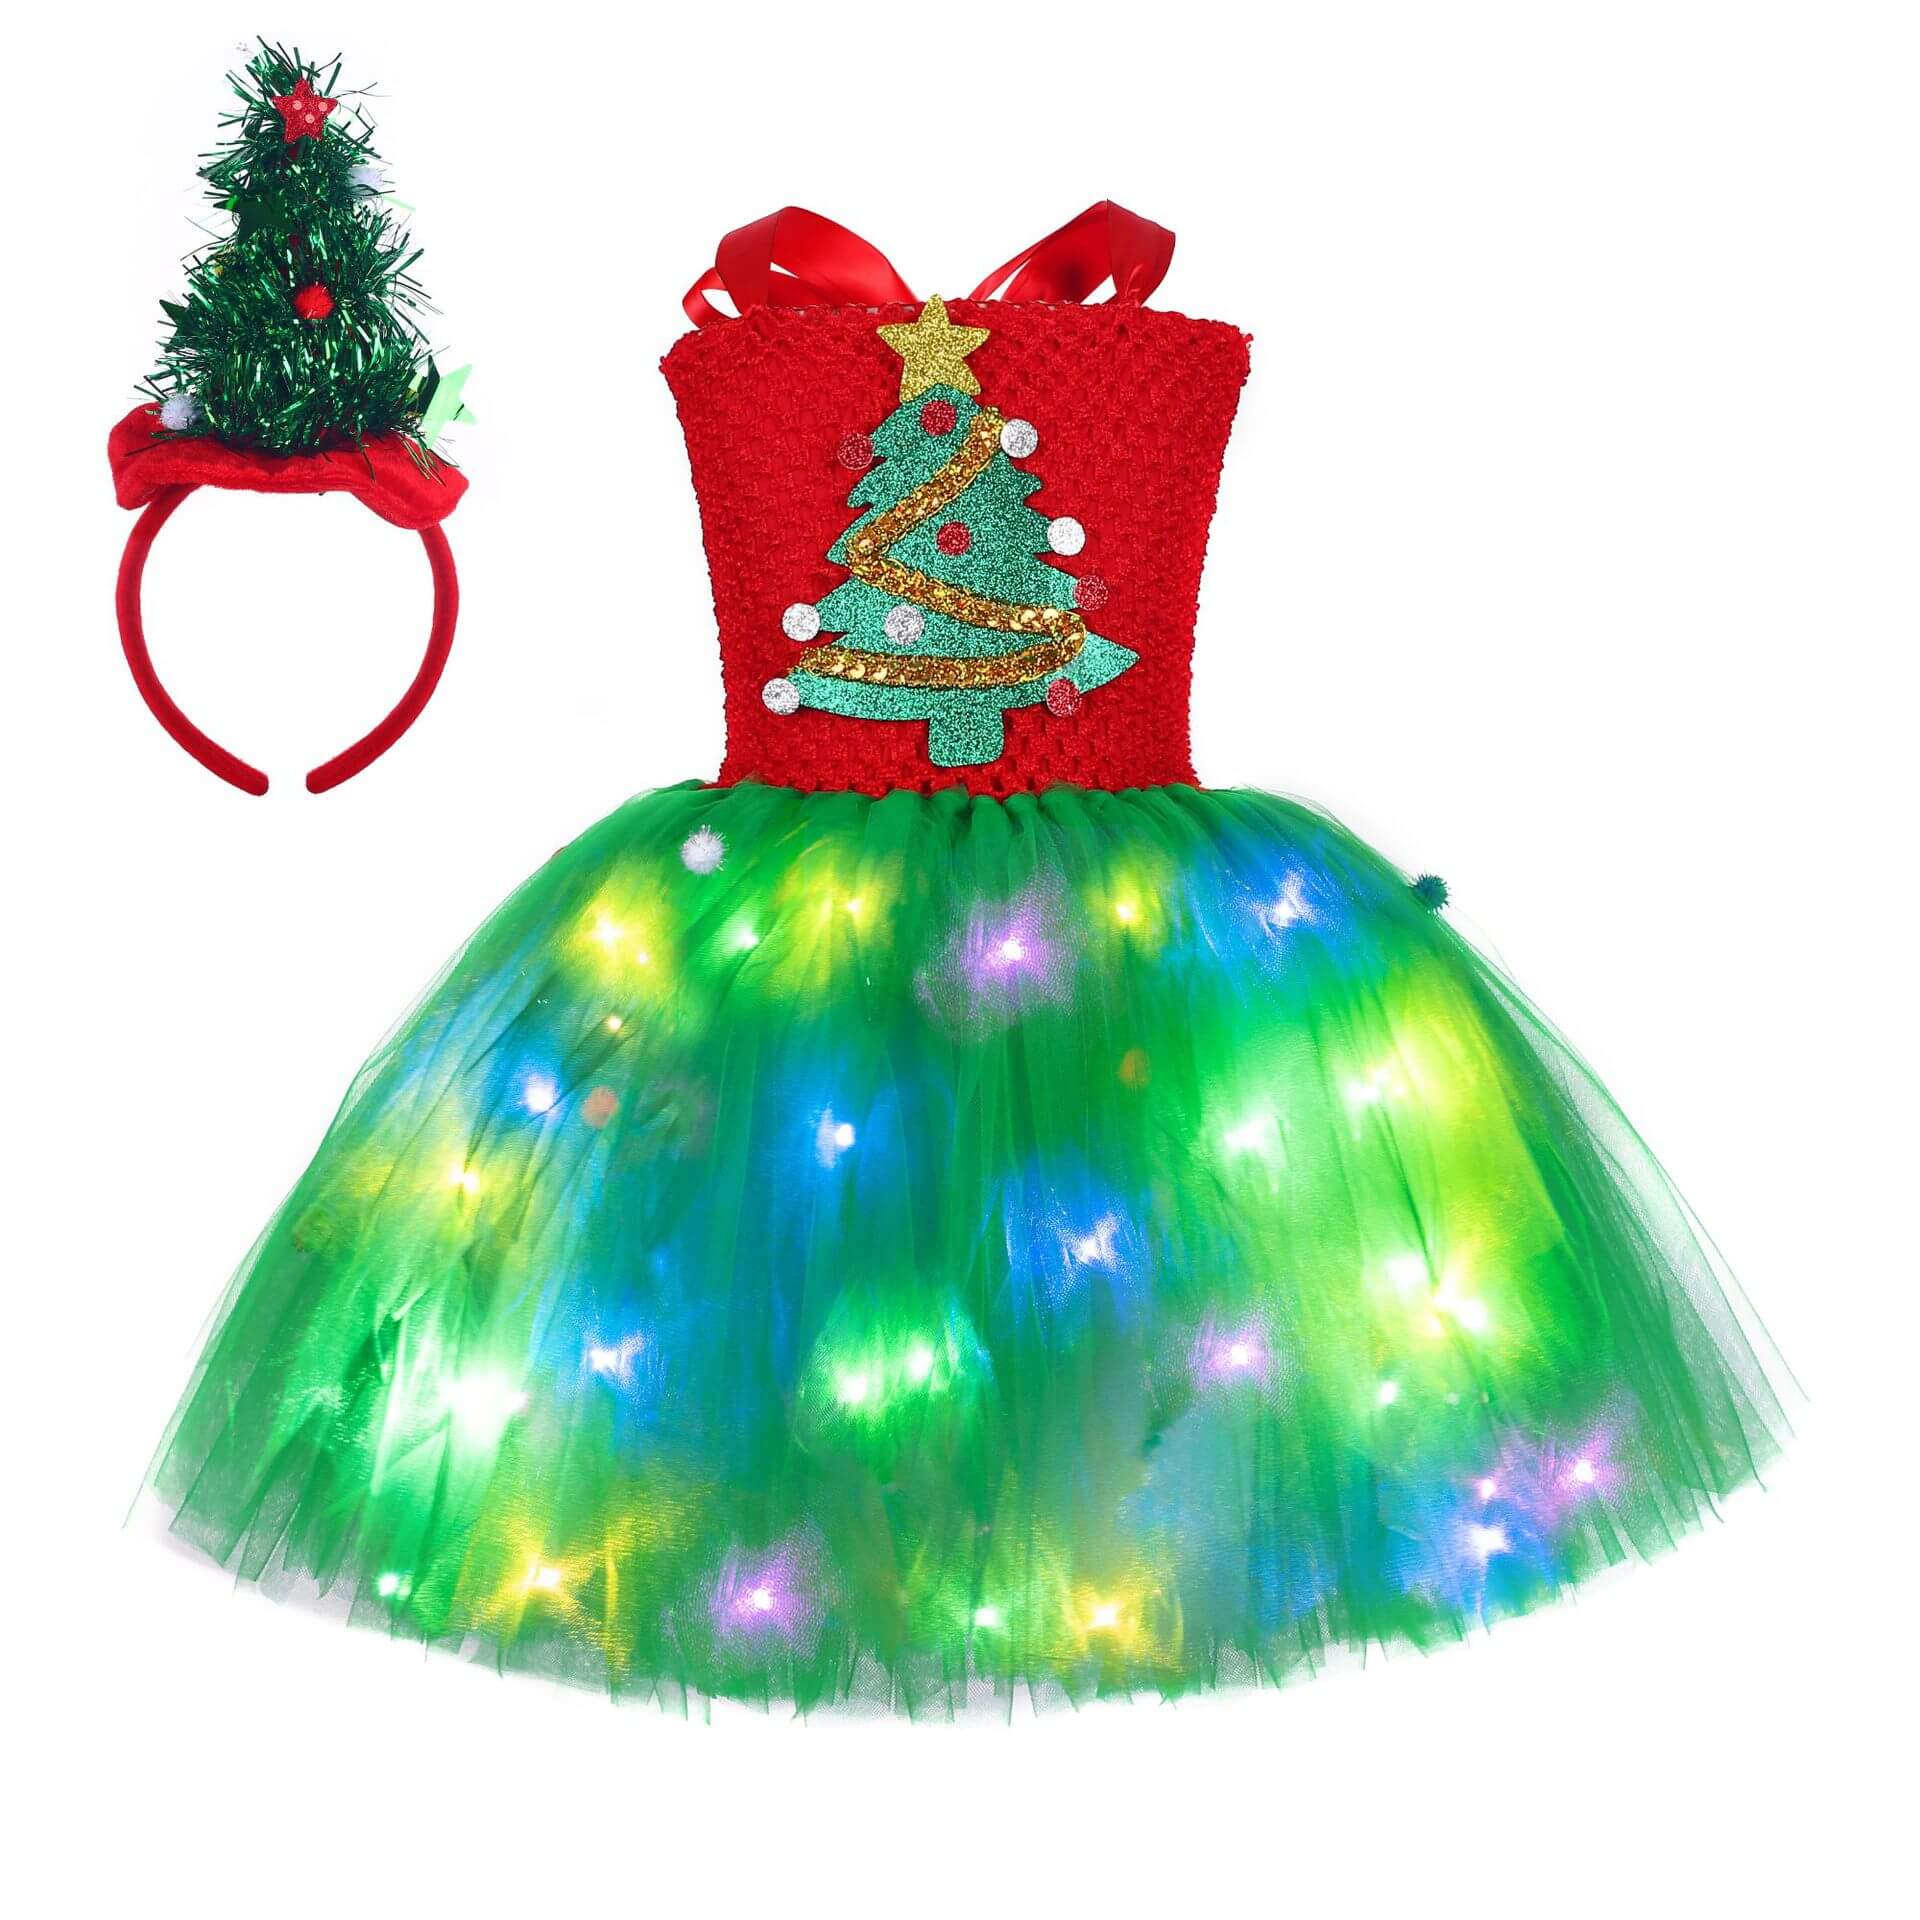 Christmas Elf Costume for Girls Toddler LED Light Up Tutu Dress and Elf Hat 2pcs Suit for Holiday Party